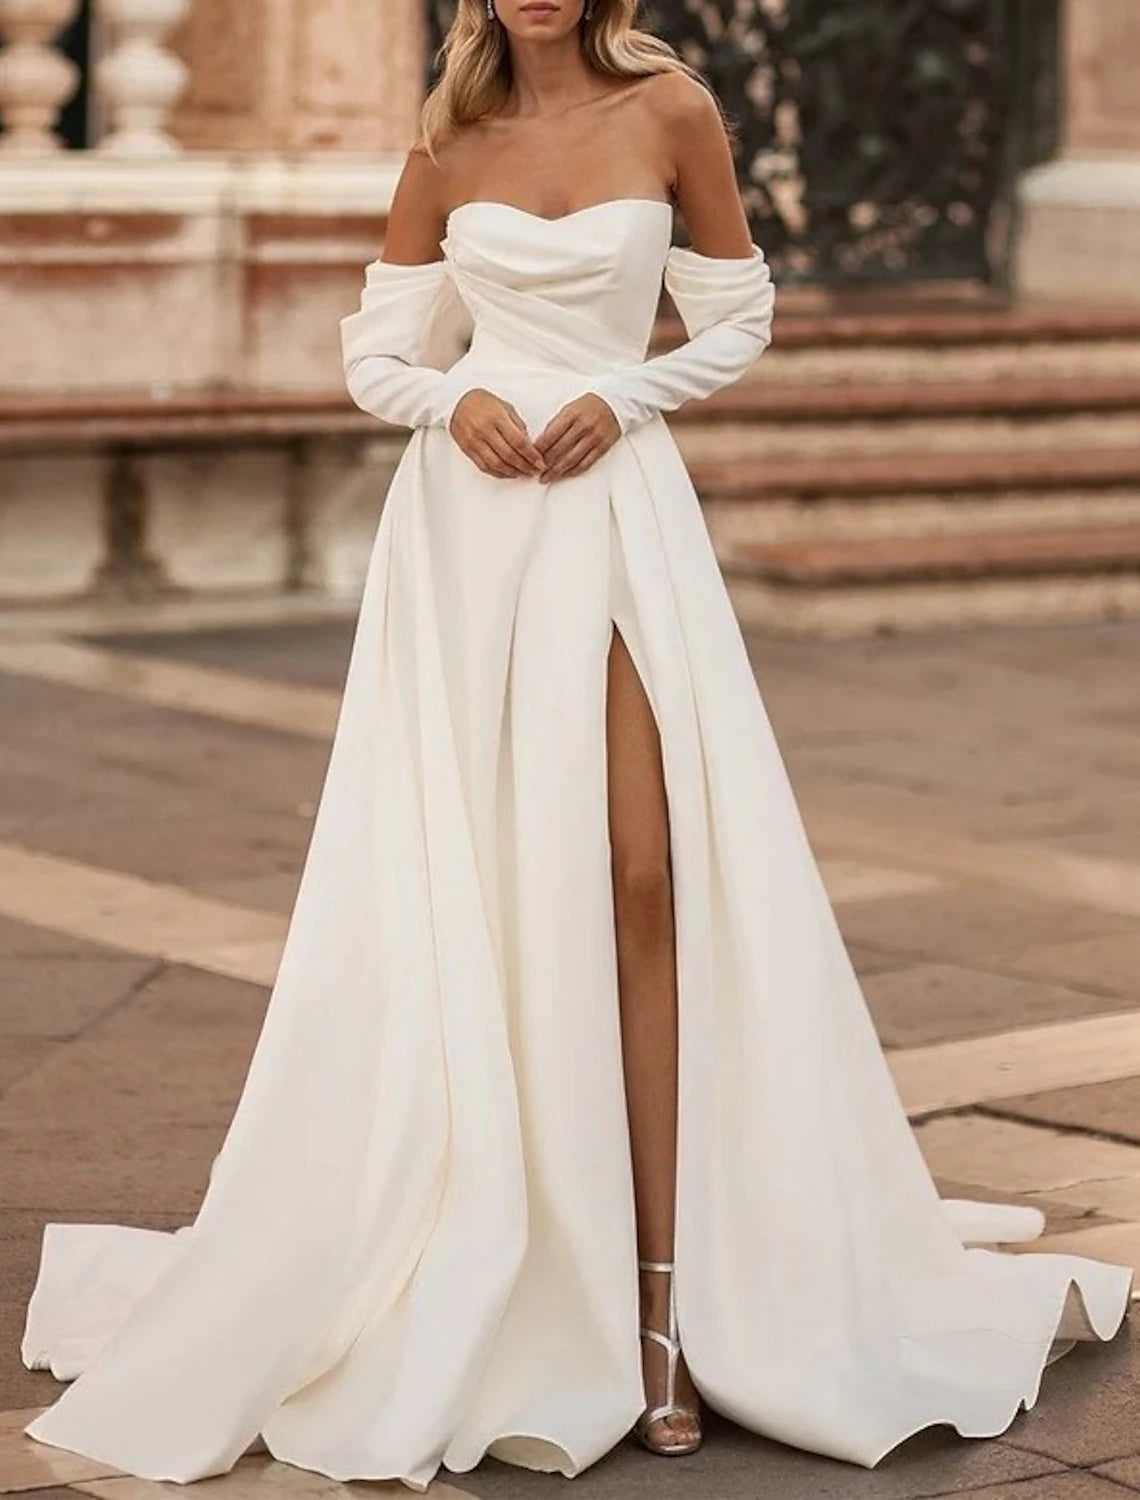 Hall Casual Wedding Dresses A-Line Off Shoulder Long Sleeve Court Train Satin Bridal Gowns With Split Front Solid Color